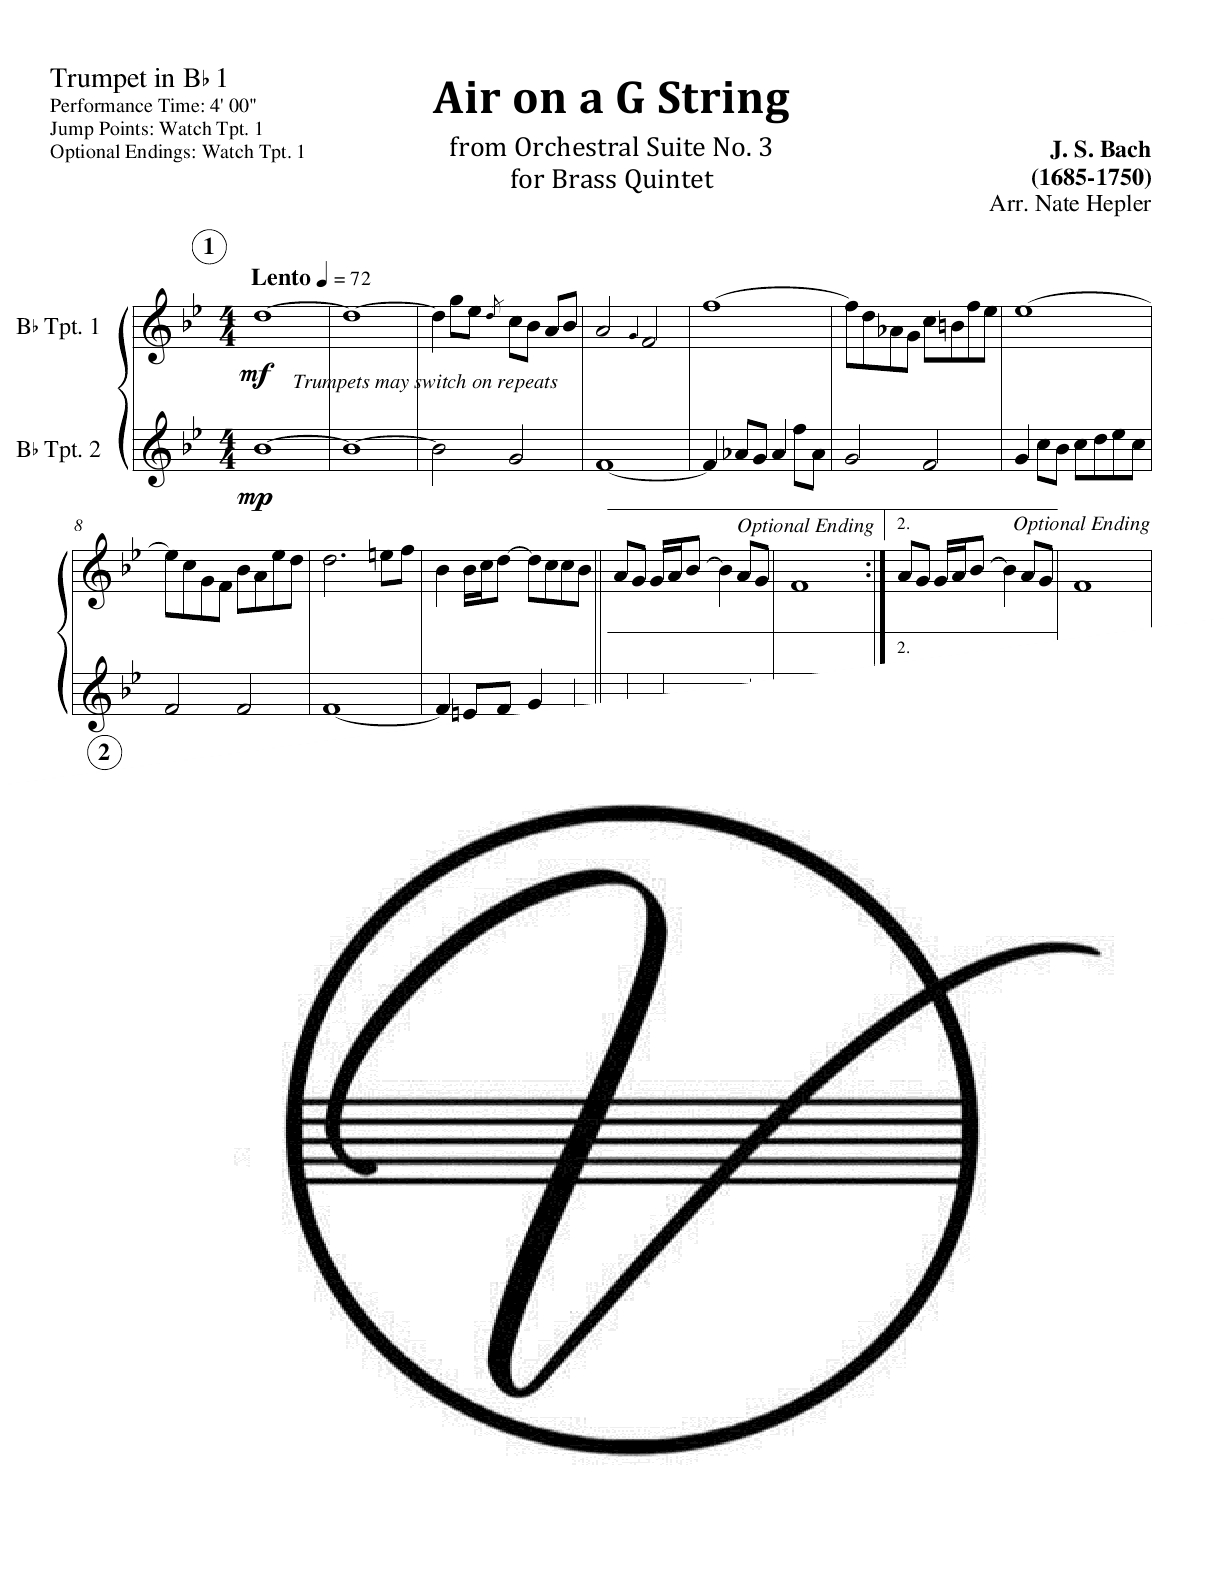 Bach - Air on a G String (Brass Quintet) - Click Image to Close